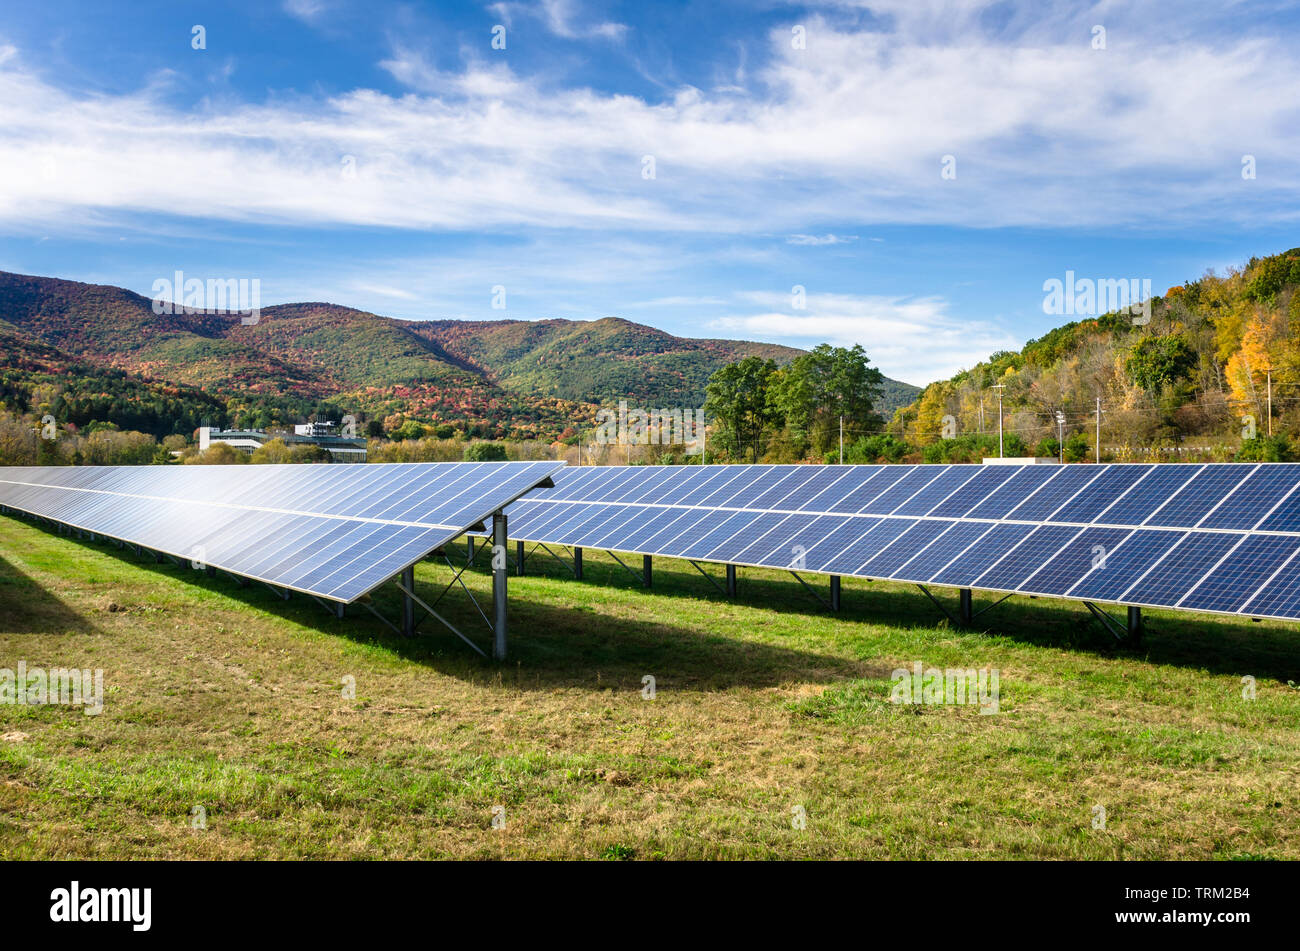 Rows of solar panels in a field in the Mountains on a sunny autumn day Stock Photo